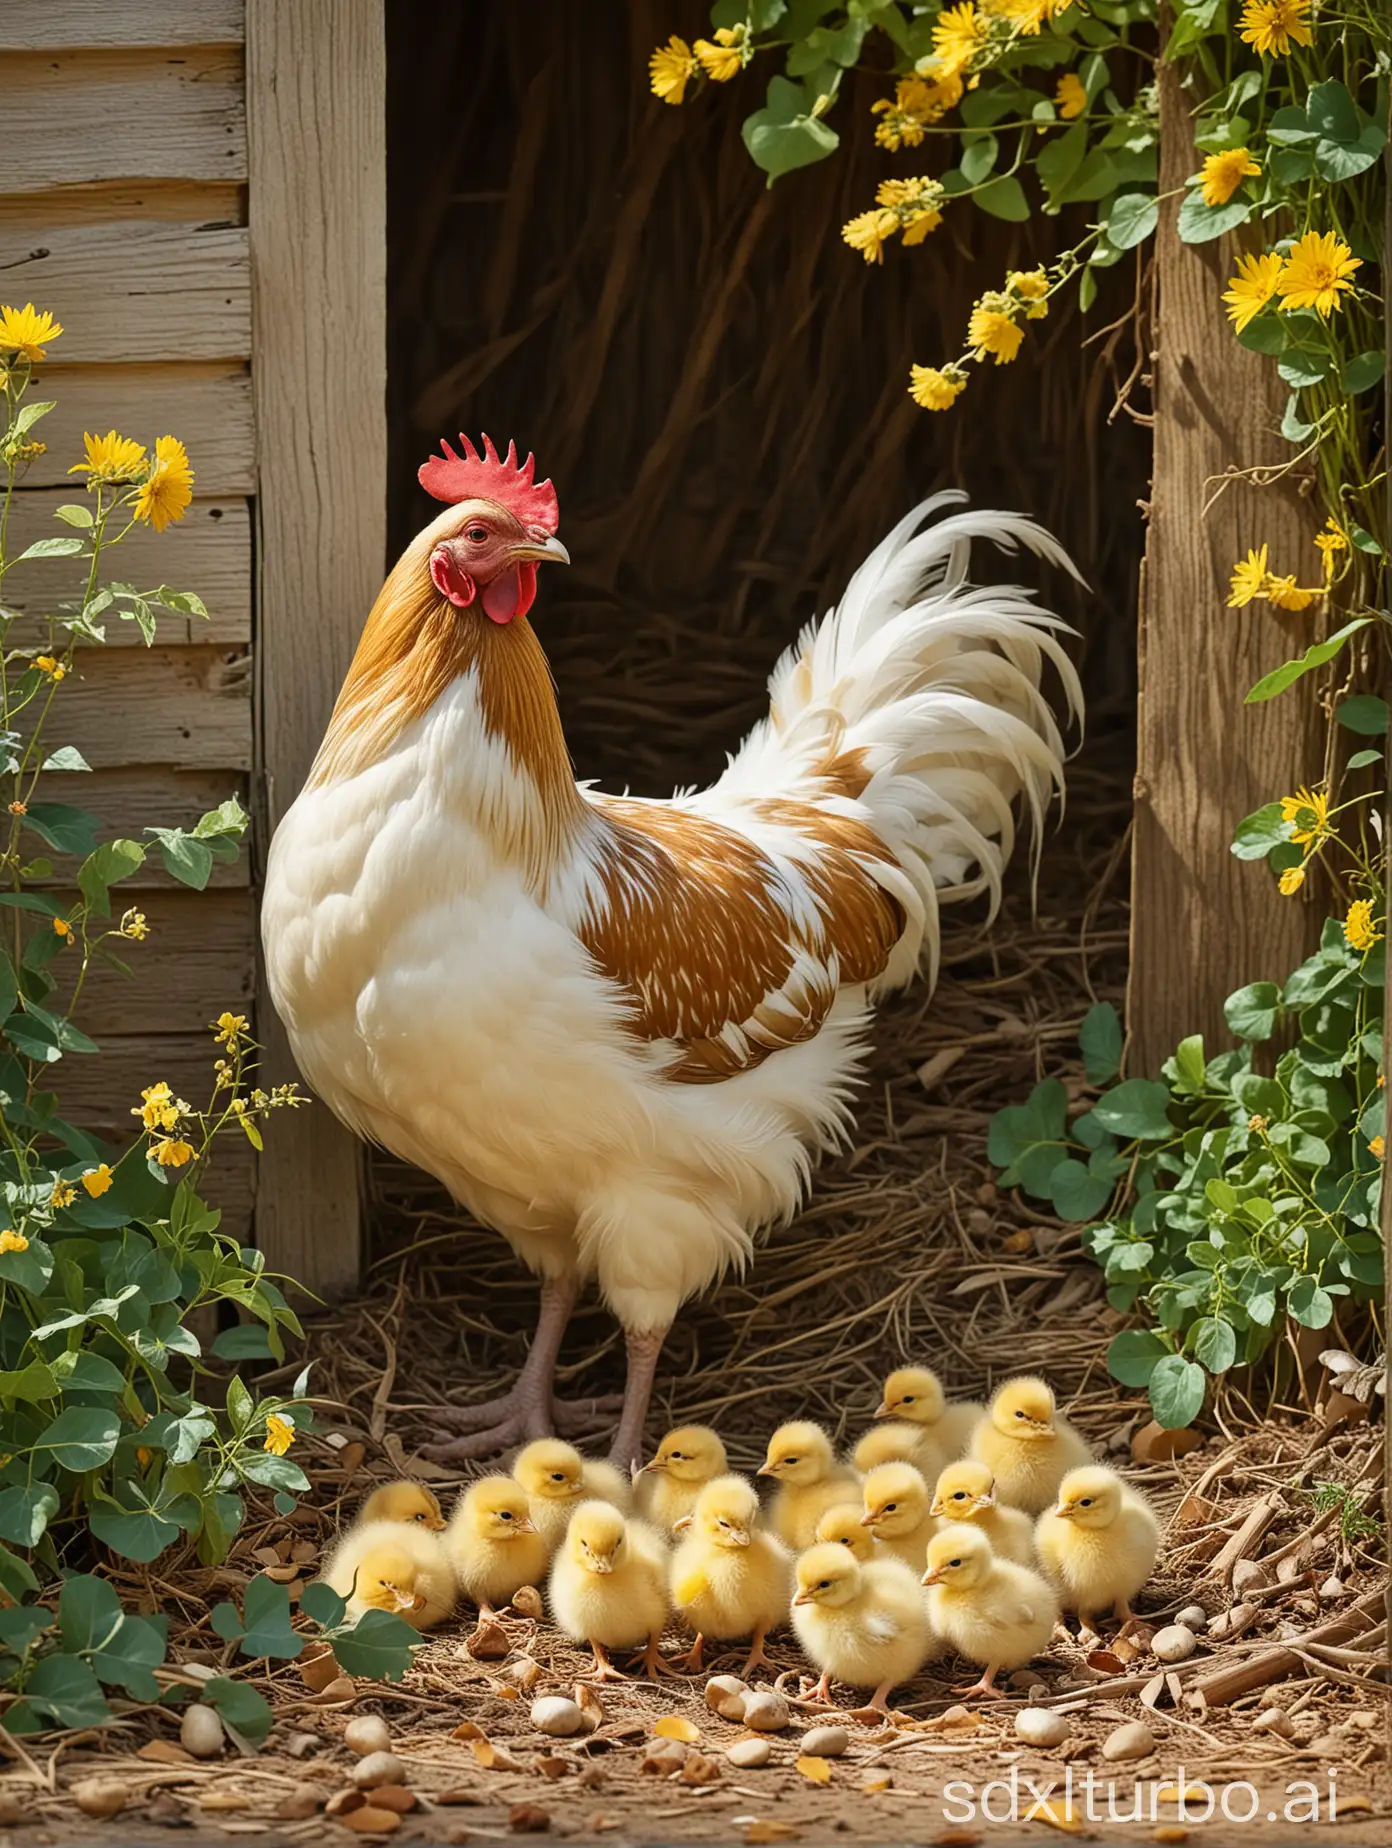 Imagine an idyllic country scene where a proud hen and her chicks are nestled together. The hen, with her golden feathers shining in the sun, keeps a close eye on her chicks. The chicks, a tangle of soft, fluffy feathers, curiously explore their world, pecking at small insects and grains.

They are nestled in a sunny corner of the yard, surrounded by a profusion of wildflowers. The air is filled with the sound of their soft clucks and the rustling of leaves in the wind. The setting is one of tranquility and peace, a perfect image of farm life. It's a scene that evokes a sense of simplicity and joy, a reminder of the ongoing cycle of life.